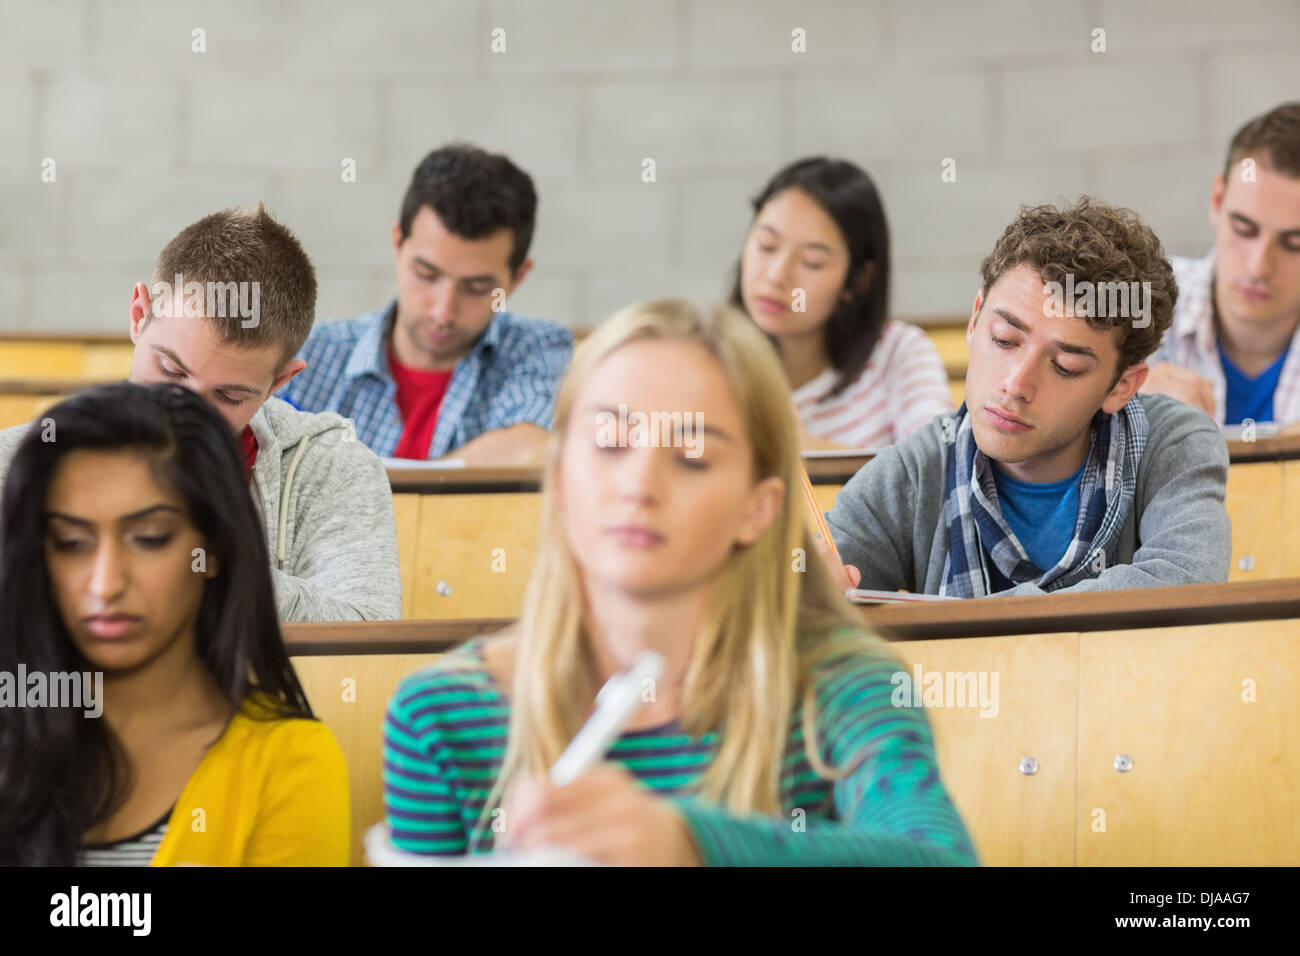 Concentrating students sitting at lecture hall Stock Photo